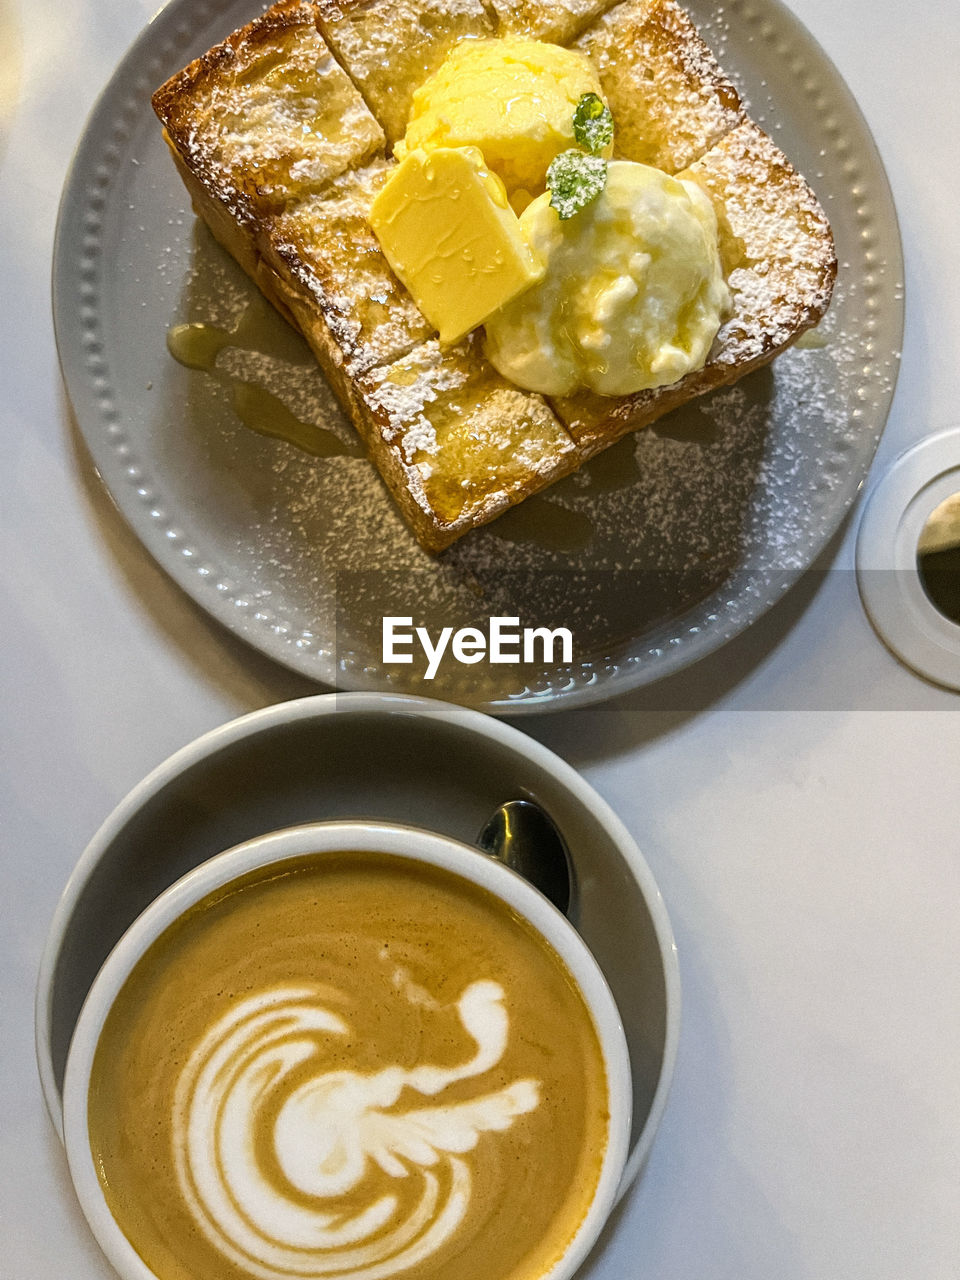 food and drink, food, dish, breakfast, meal, freshness, sweet food, healthy eating, drink, produce, indoors, high angle view, sweet, no people, dessert, still life, refreshment, coffee, dairy, plate, wellbeing, cake, baked, table, studio shot, directly above